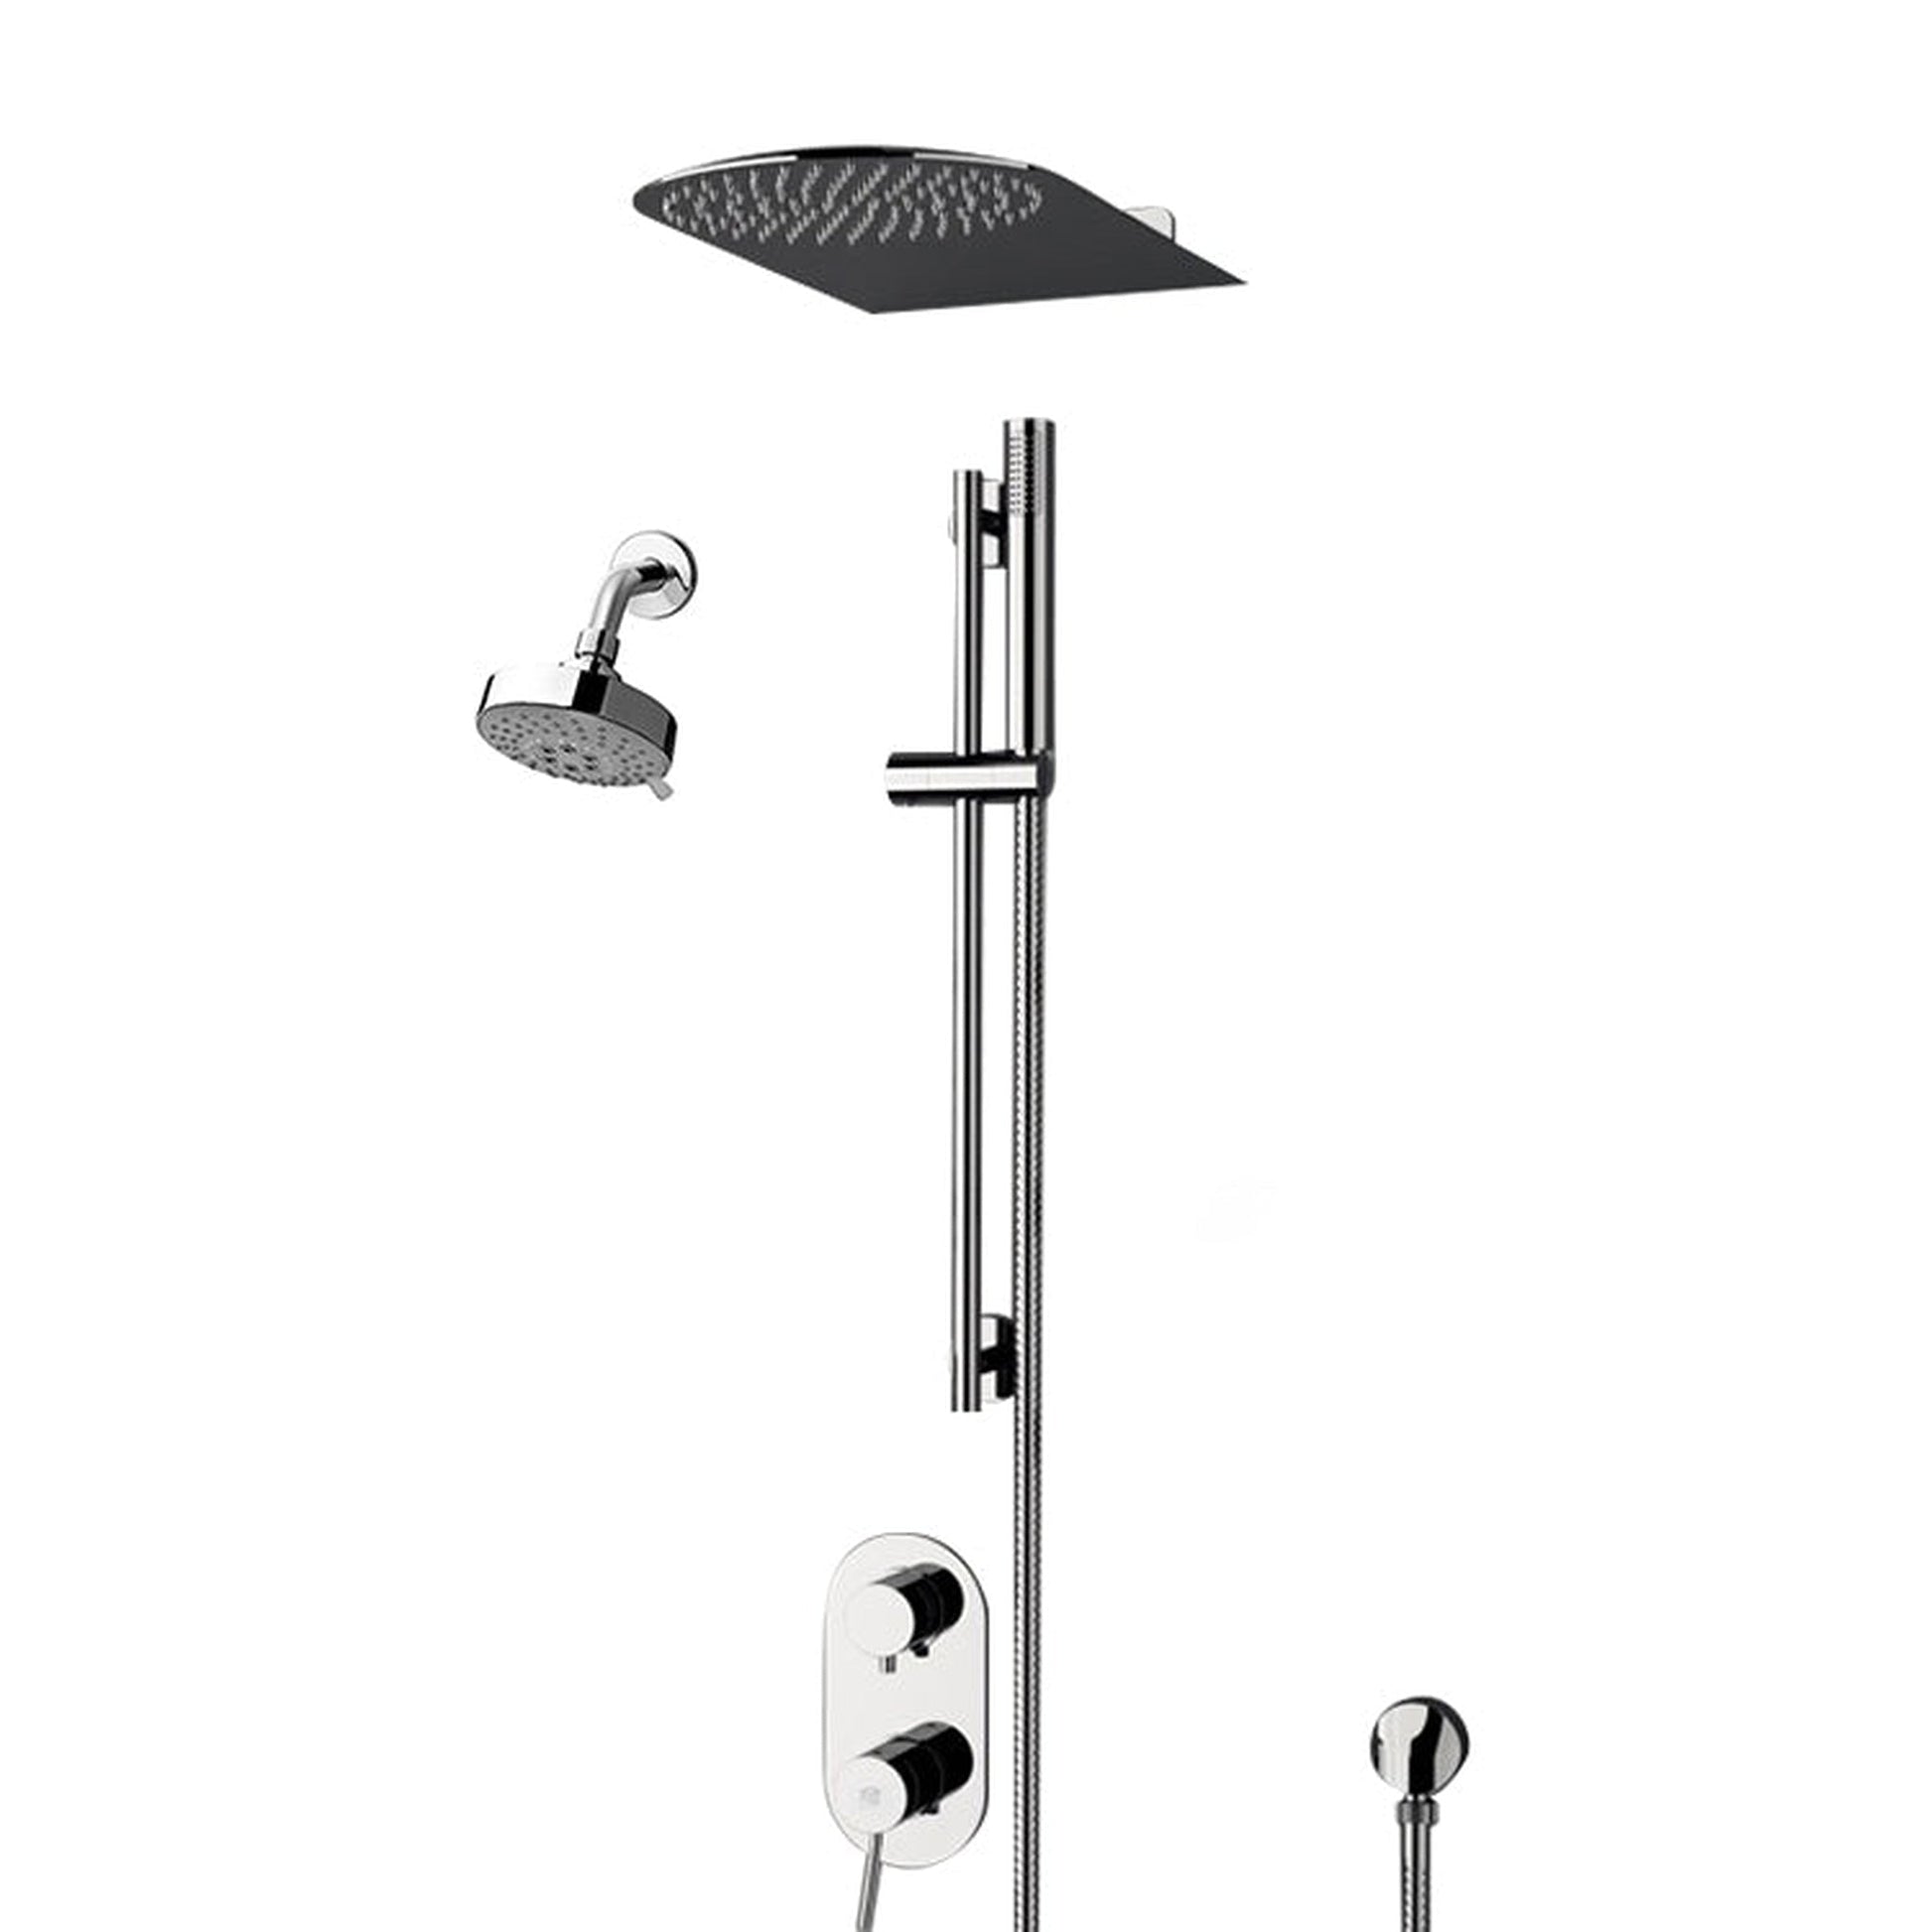 Fontana Deluxe Creative Luxury 8" Chrome Wall-Mounted Dual Shower Head Rainfall Shower System With Hand Shower